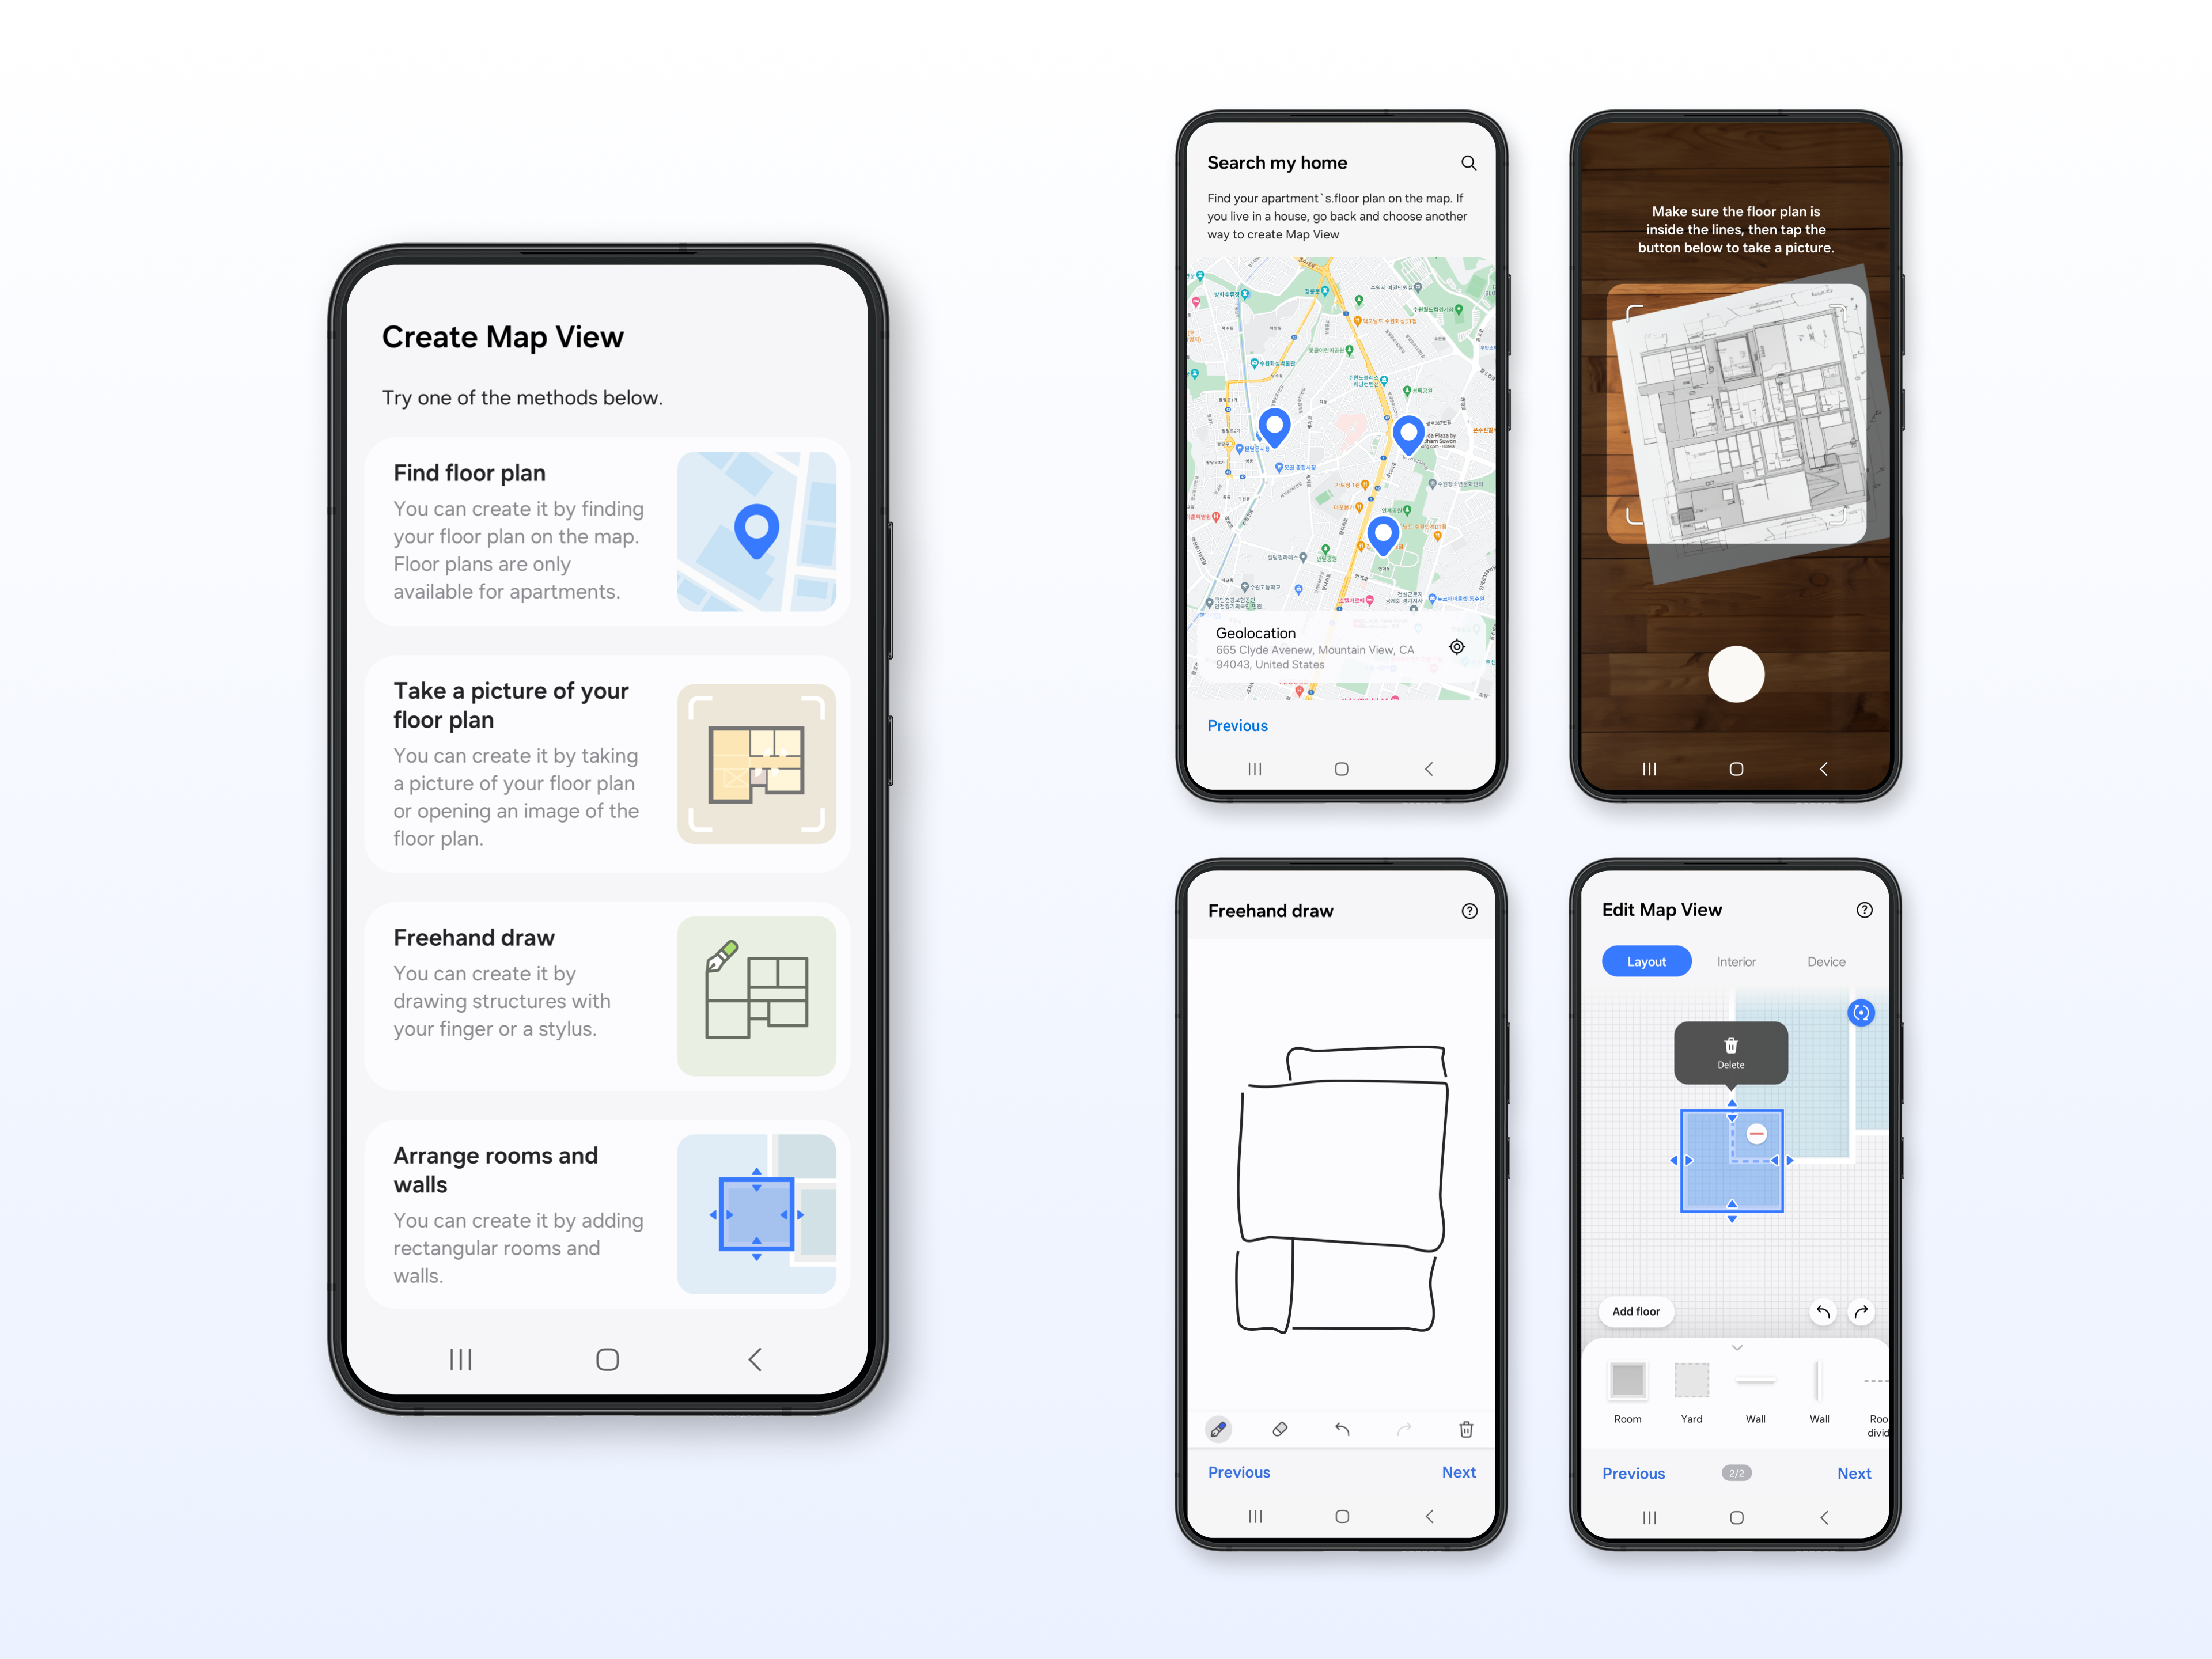 SmartThings Map View